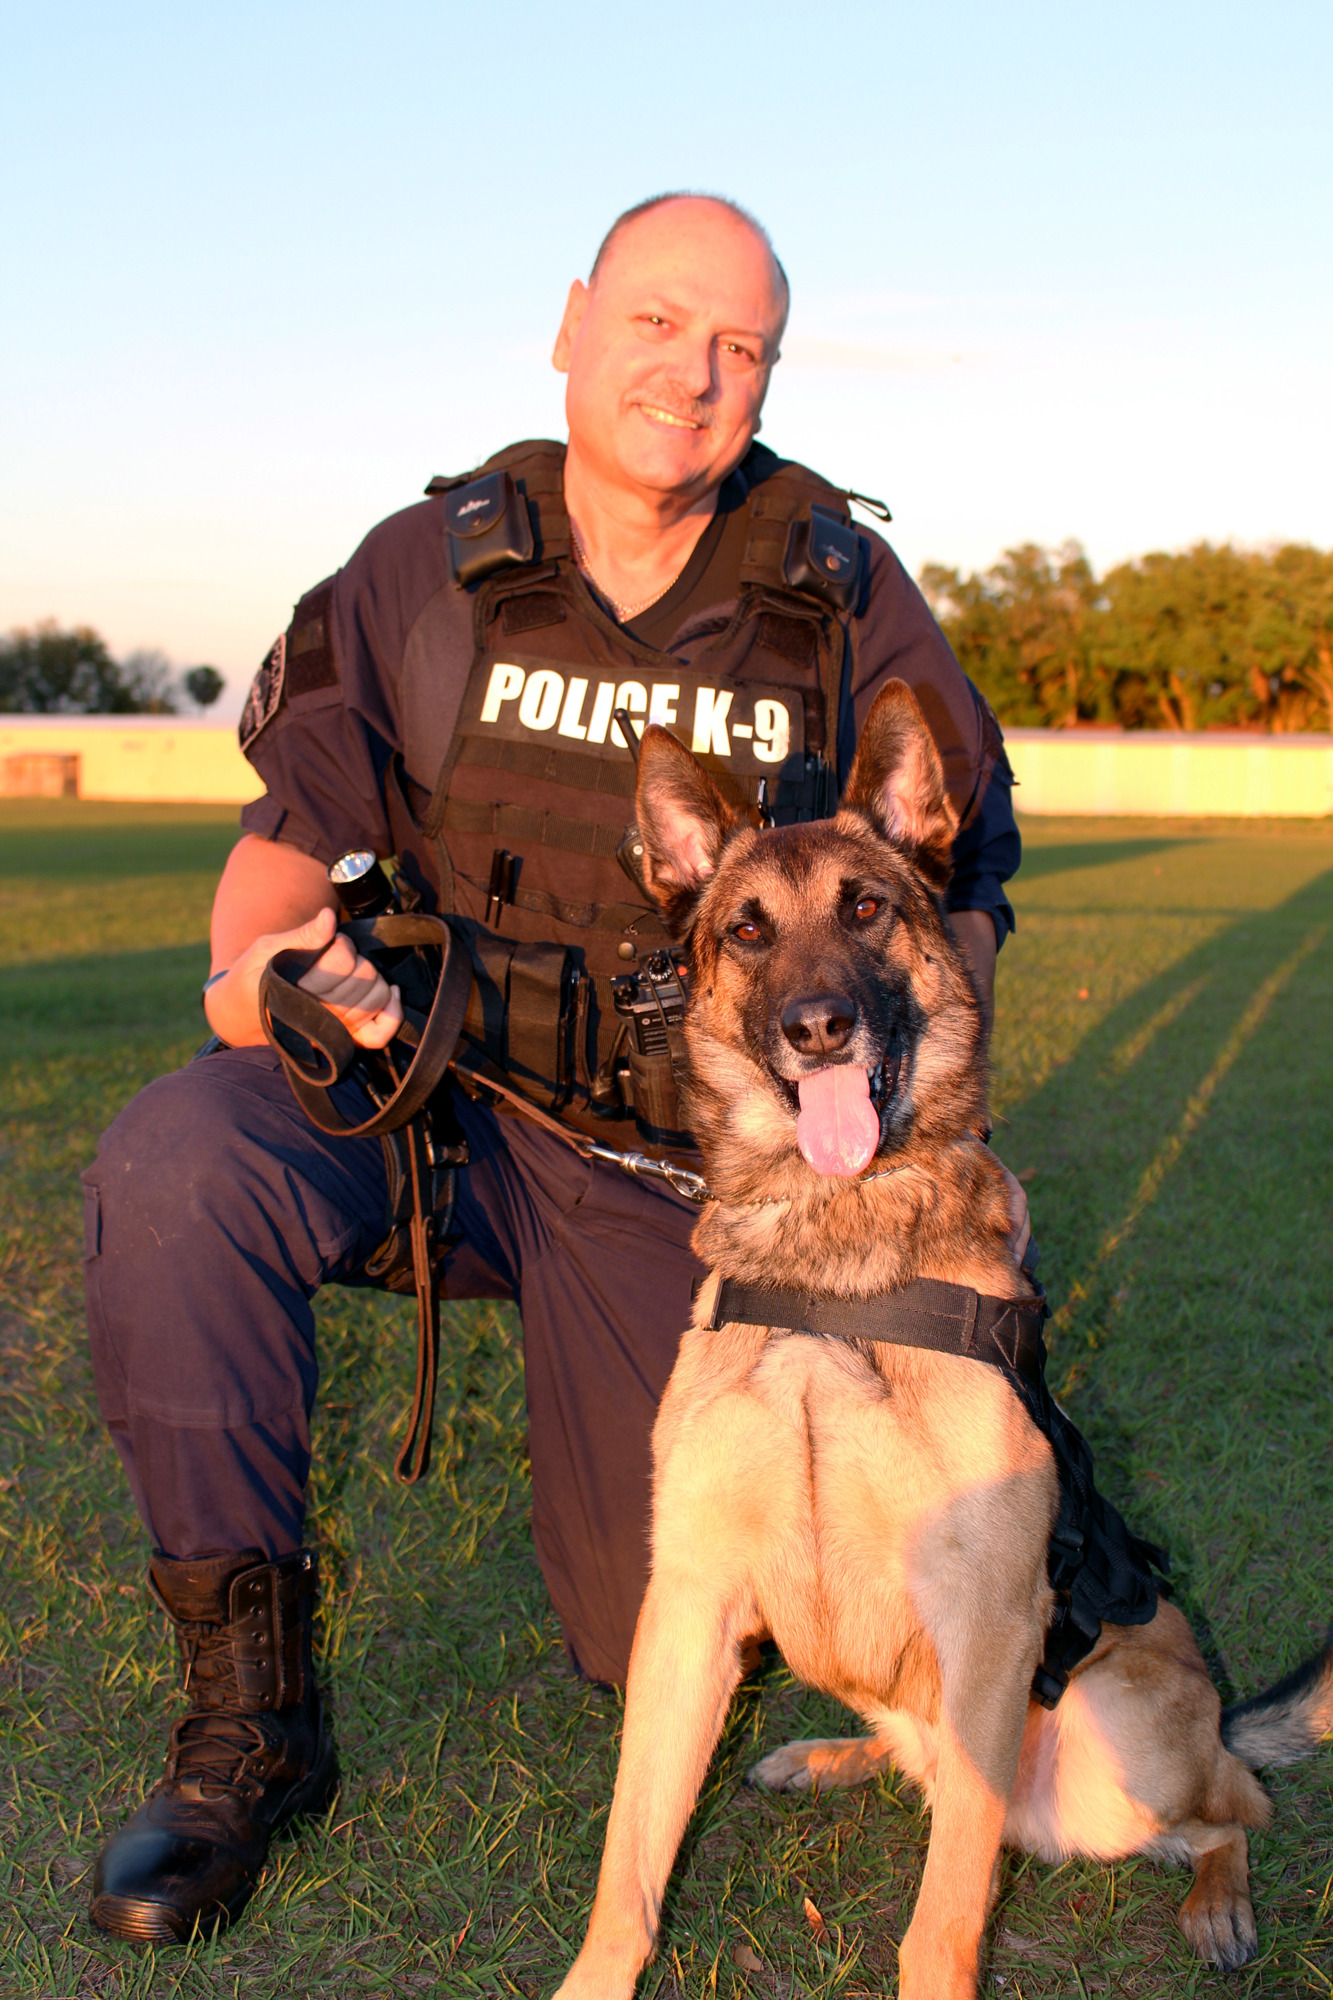 Oakland police officer Anthony Vitale and K-9 Chase, a Belgian Malinois who graduated from WGPD K-9 school on March 1. “Chase is always in a good mood. Whatever type of calls I handle, he is always there with an upbeat demeanor.